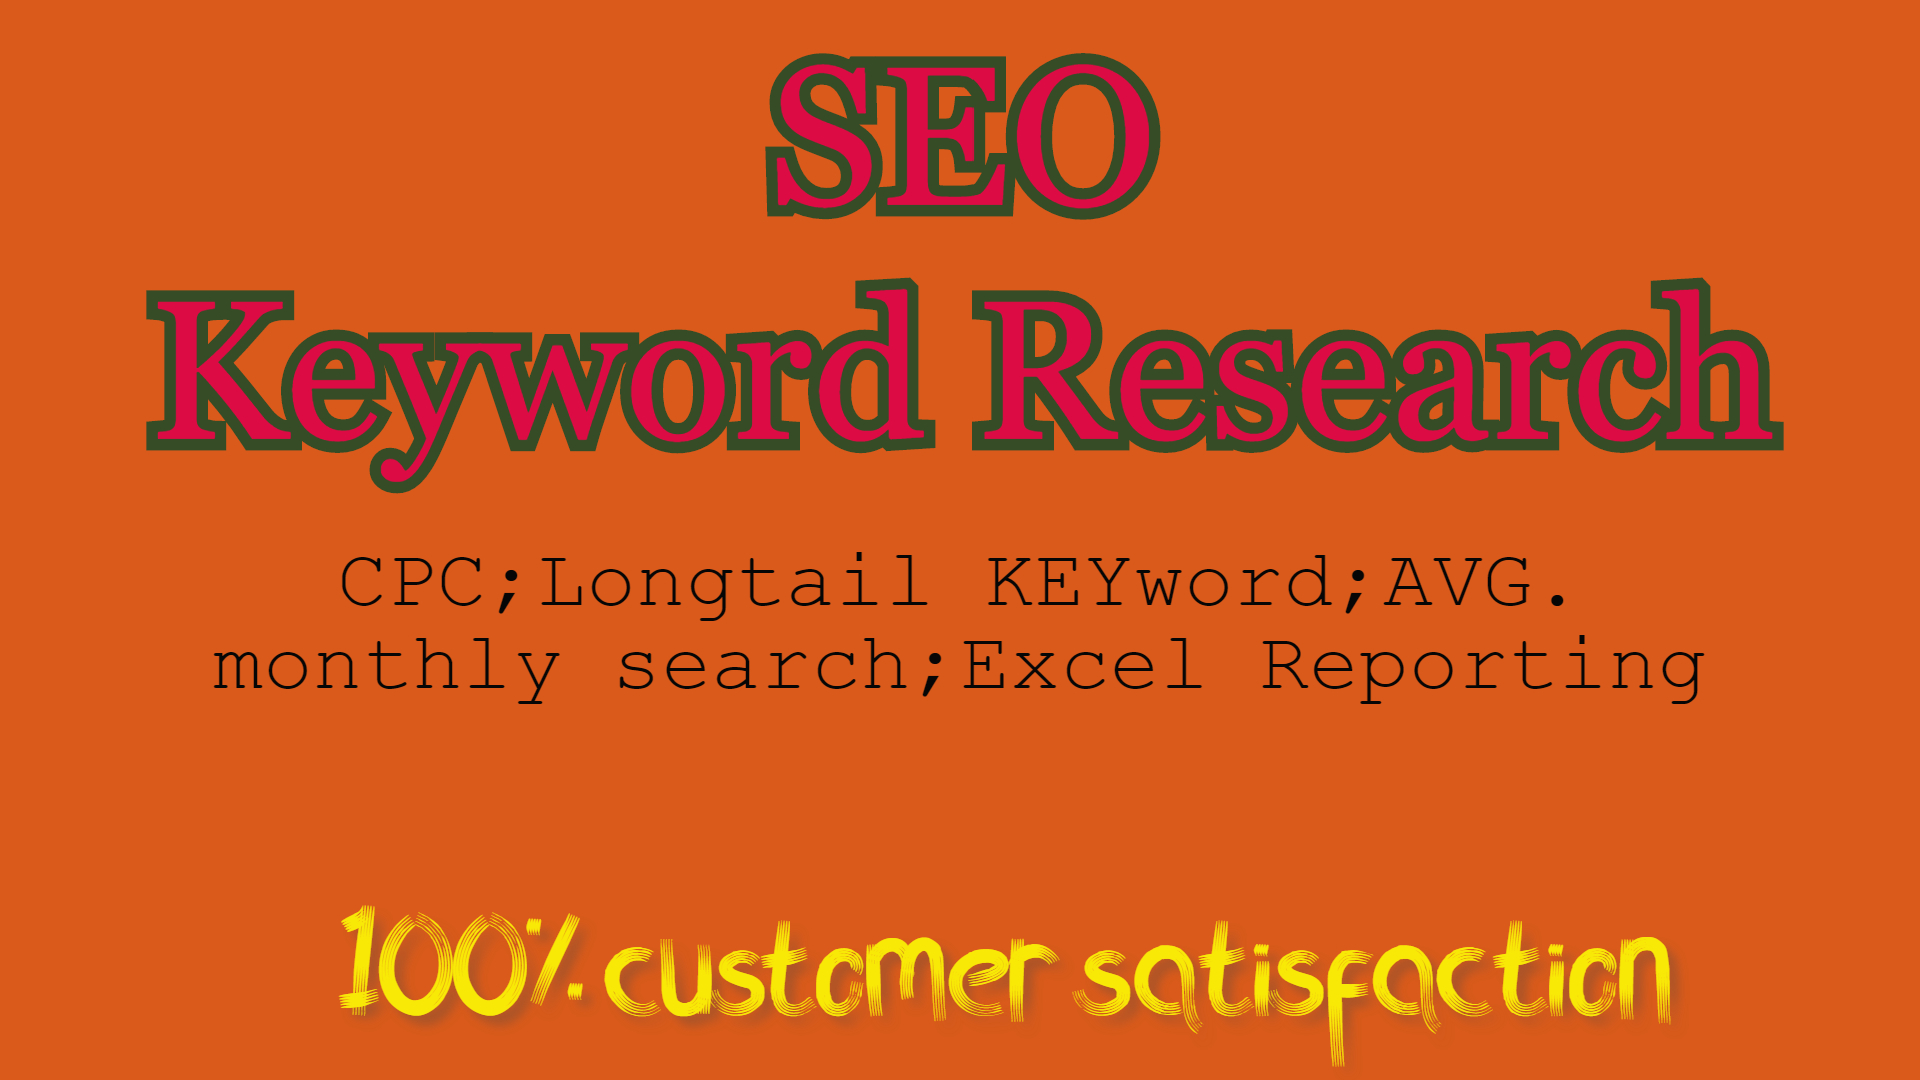 KW Competition Research & 30 white hat brainstormed Keyword will be provided to rank your site